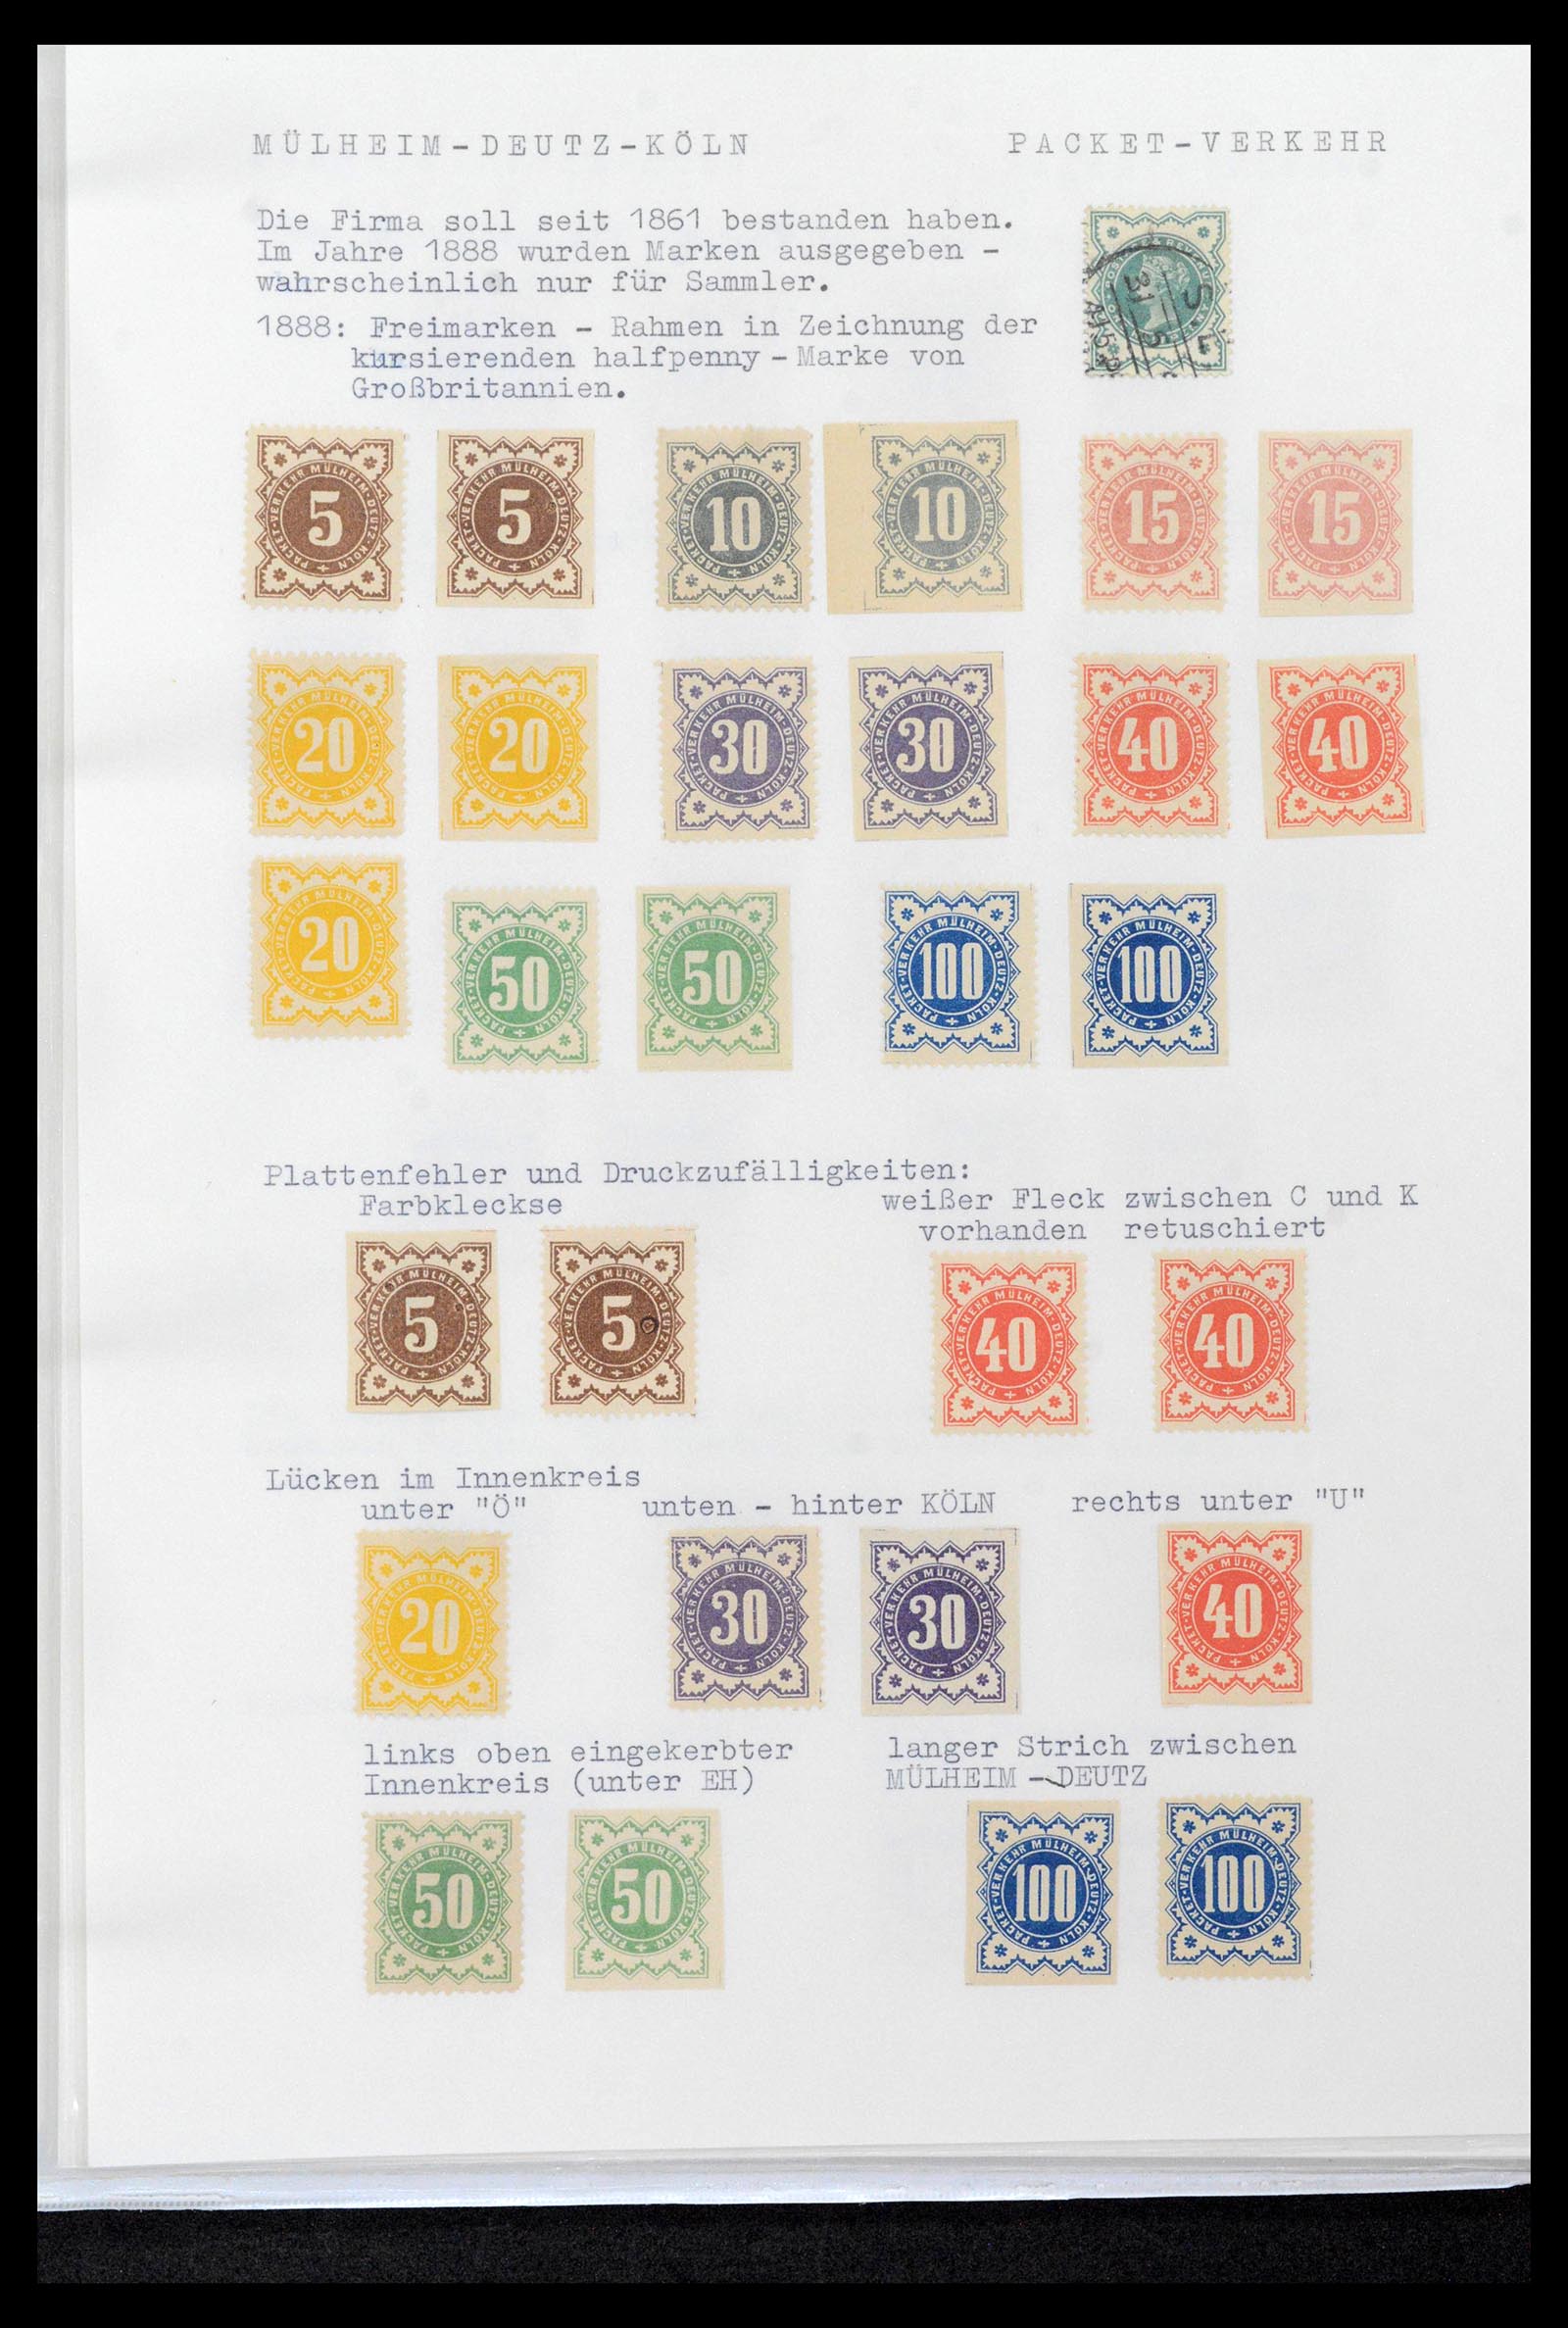 39369 0031 - Stamp collection 39369 Germany citypost 1886-1899.